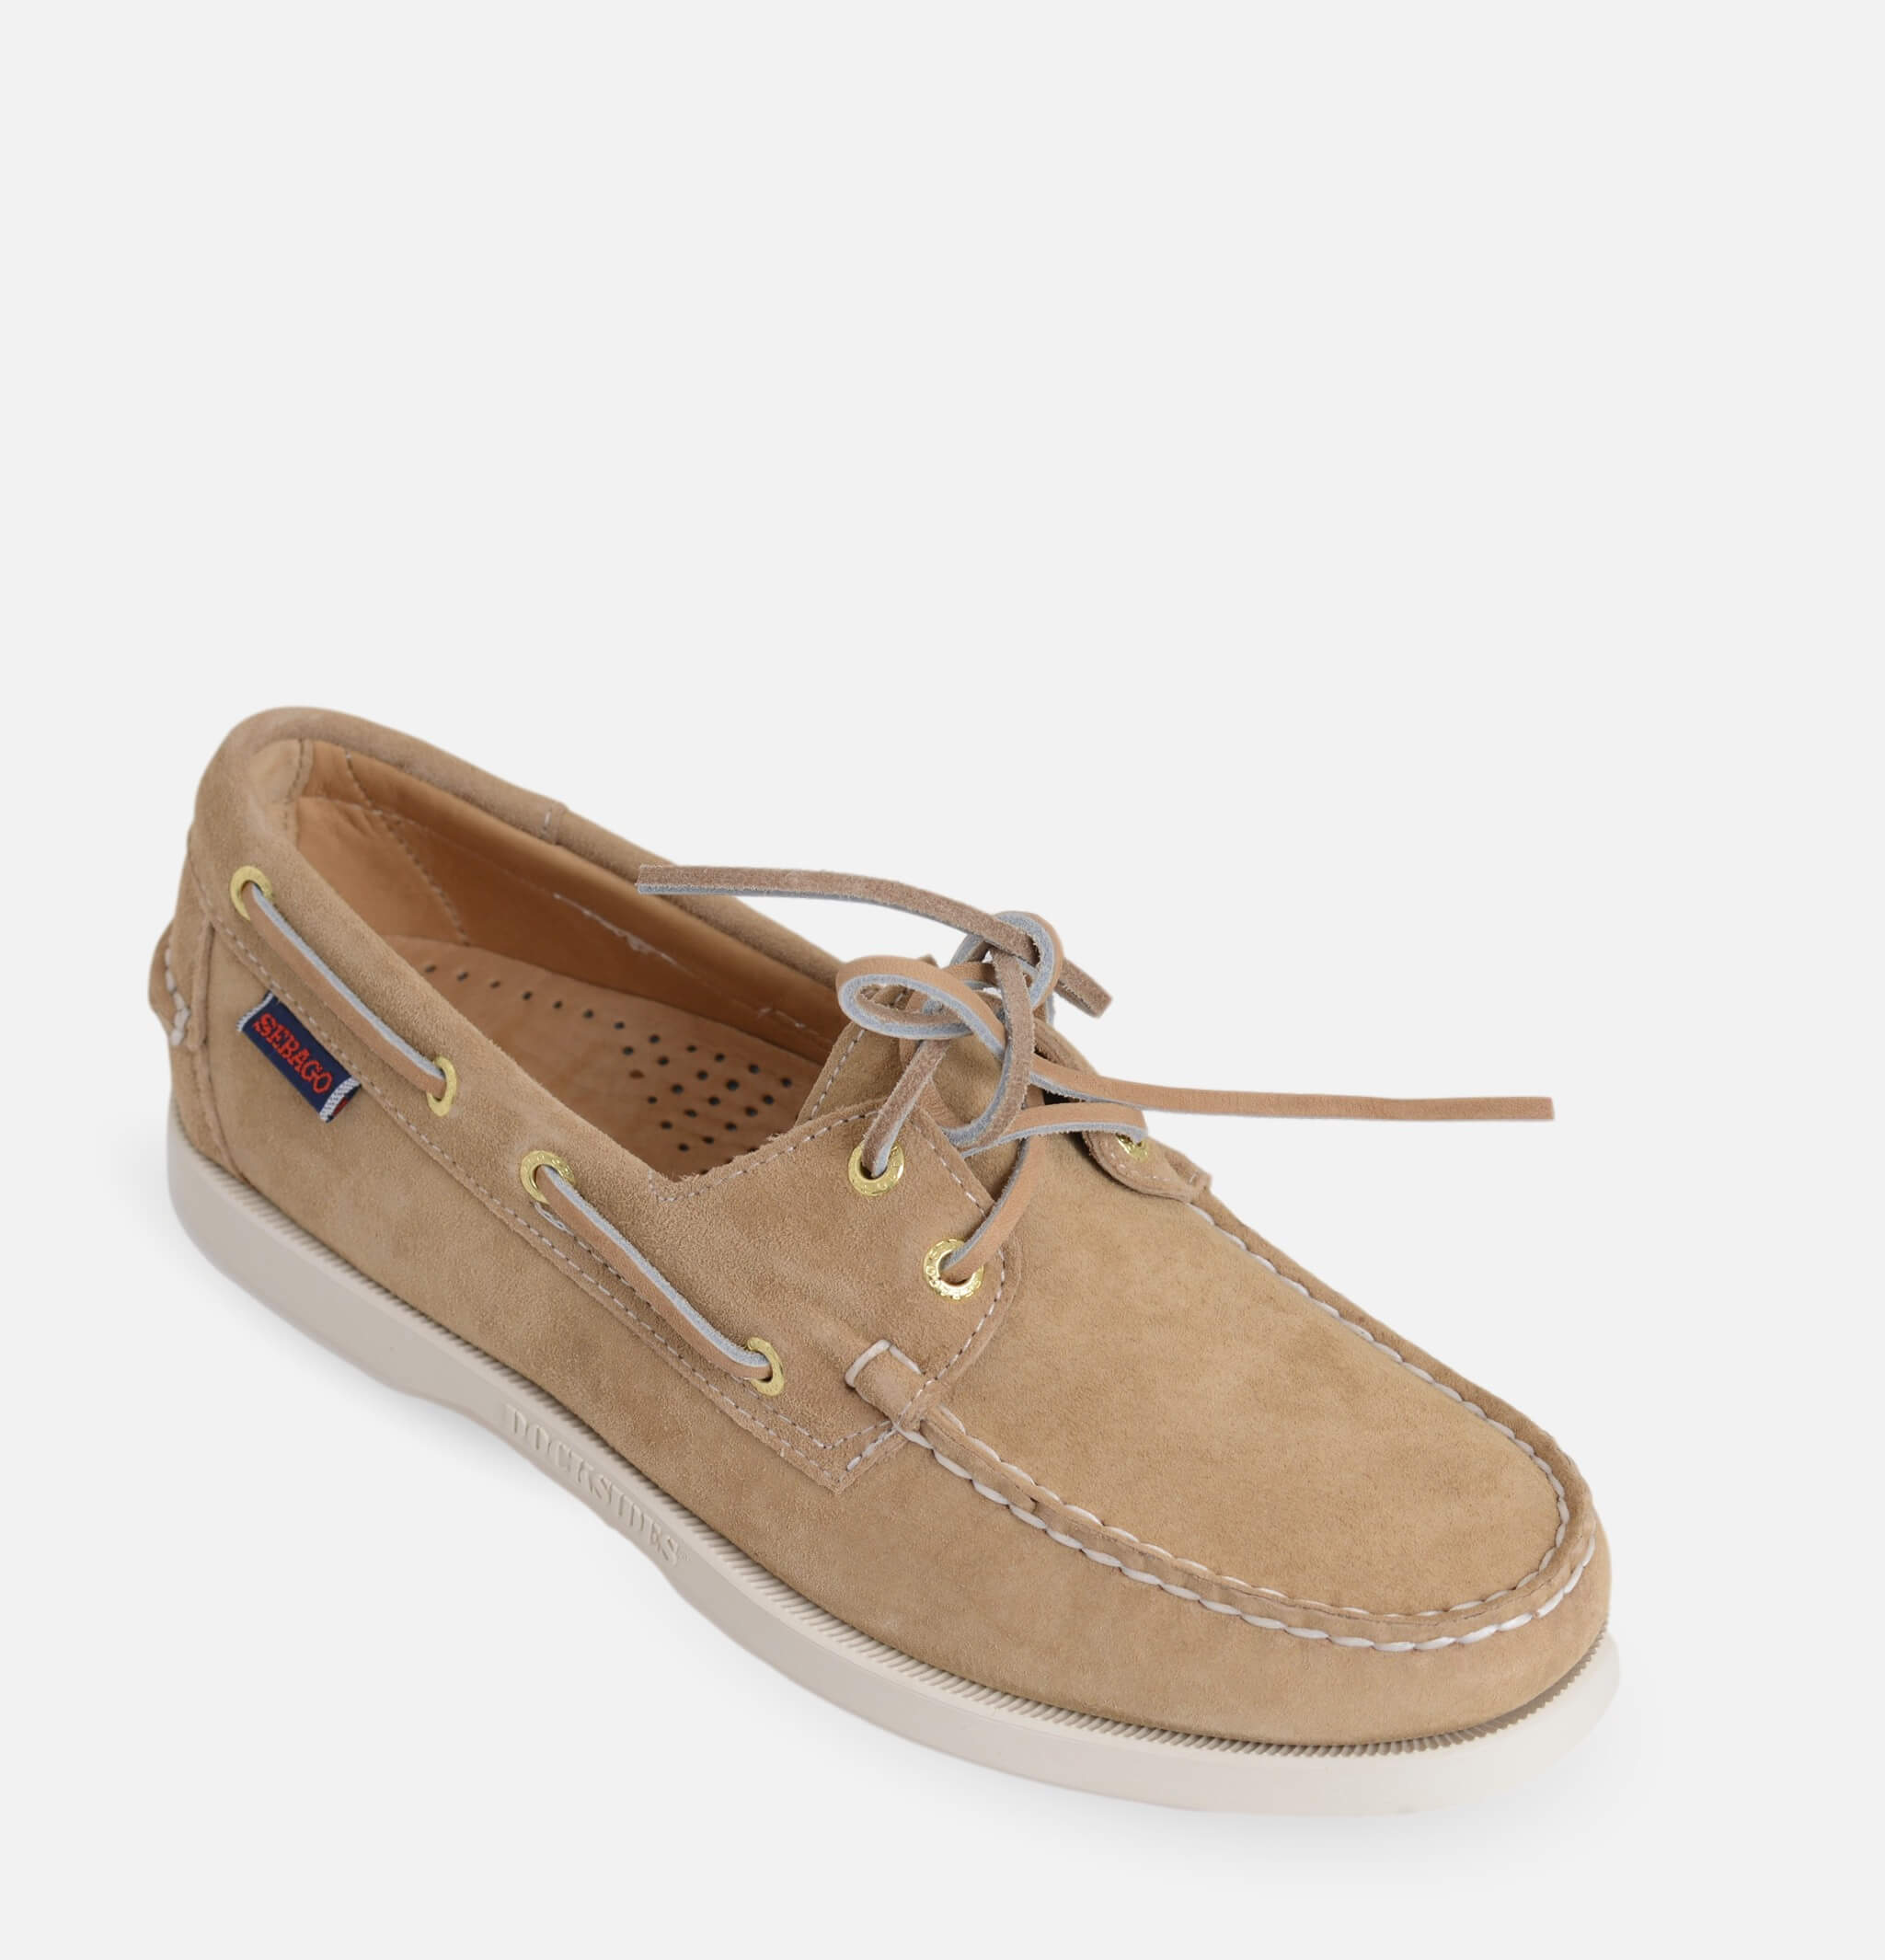 Chaussures Docksides Sand Suede